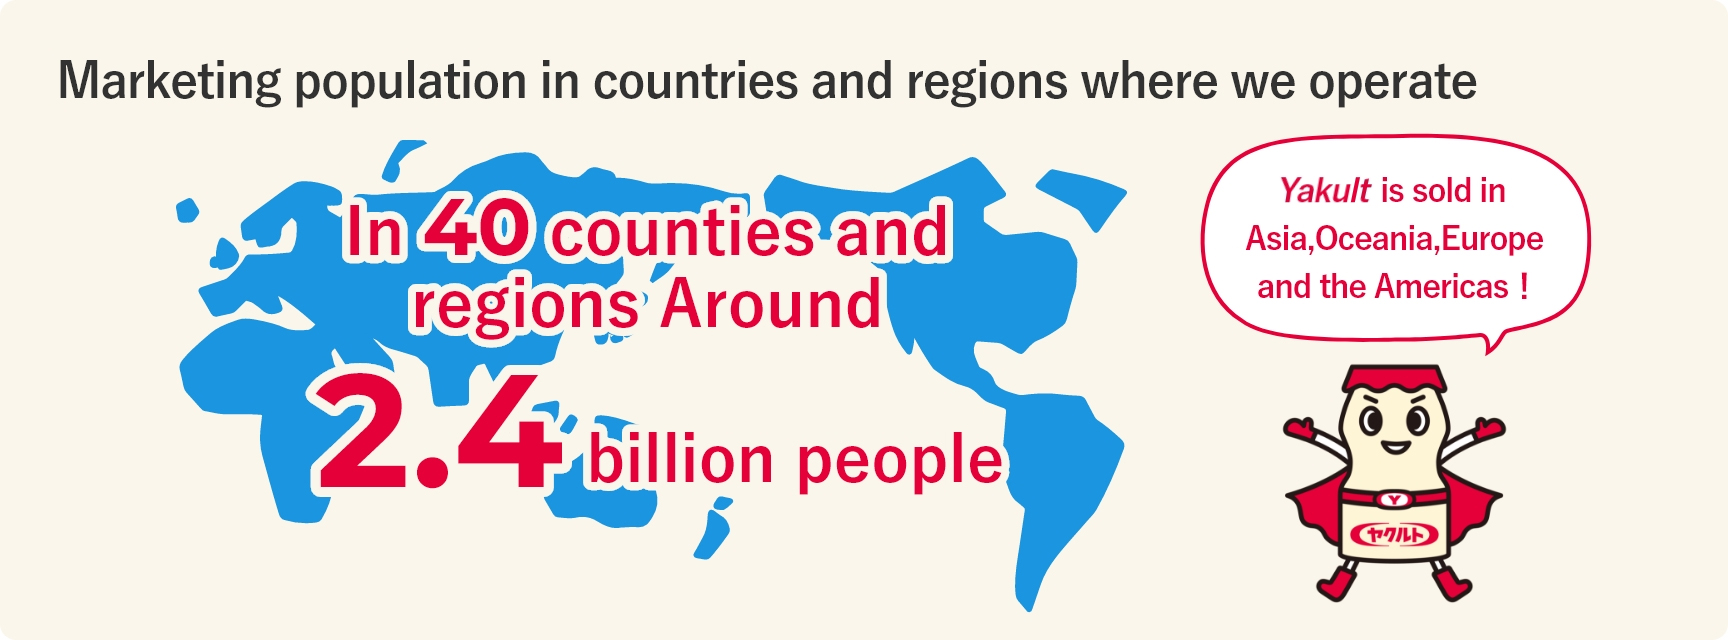 Marketing population in countries and regions where we operate